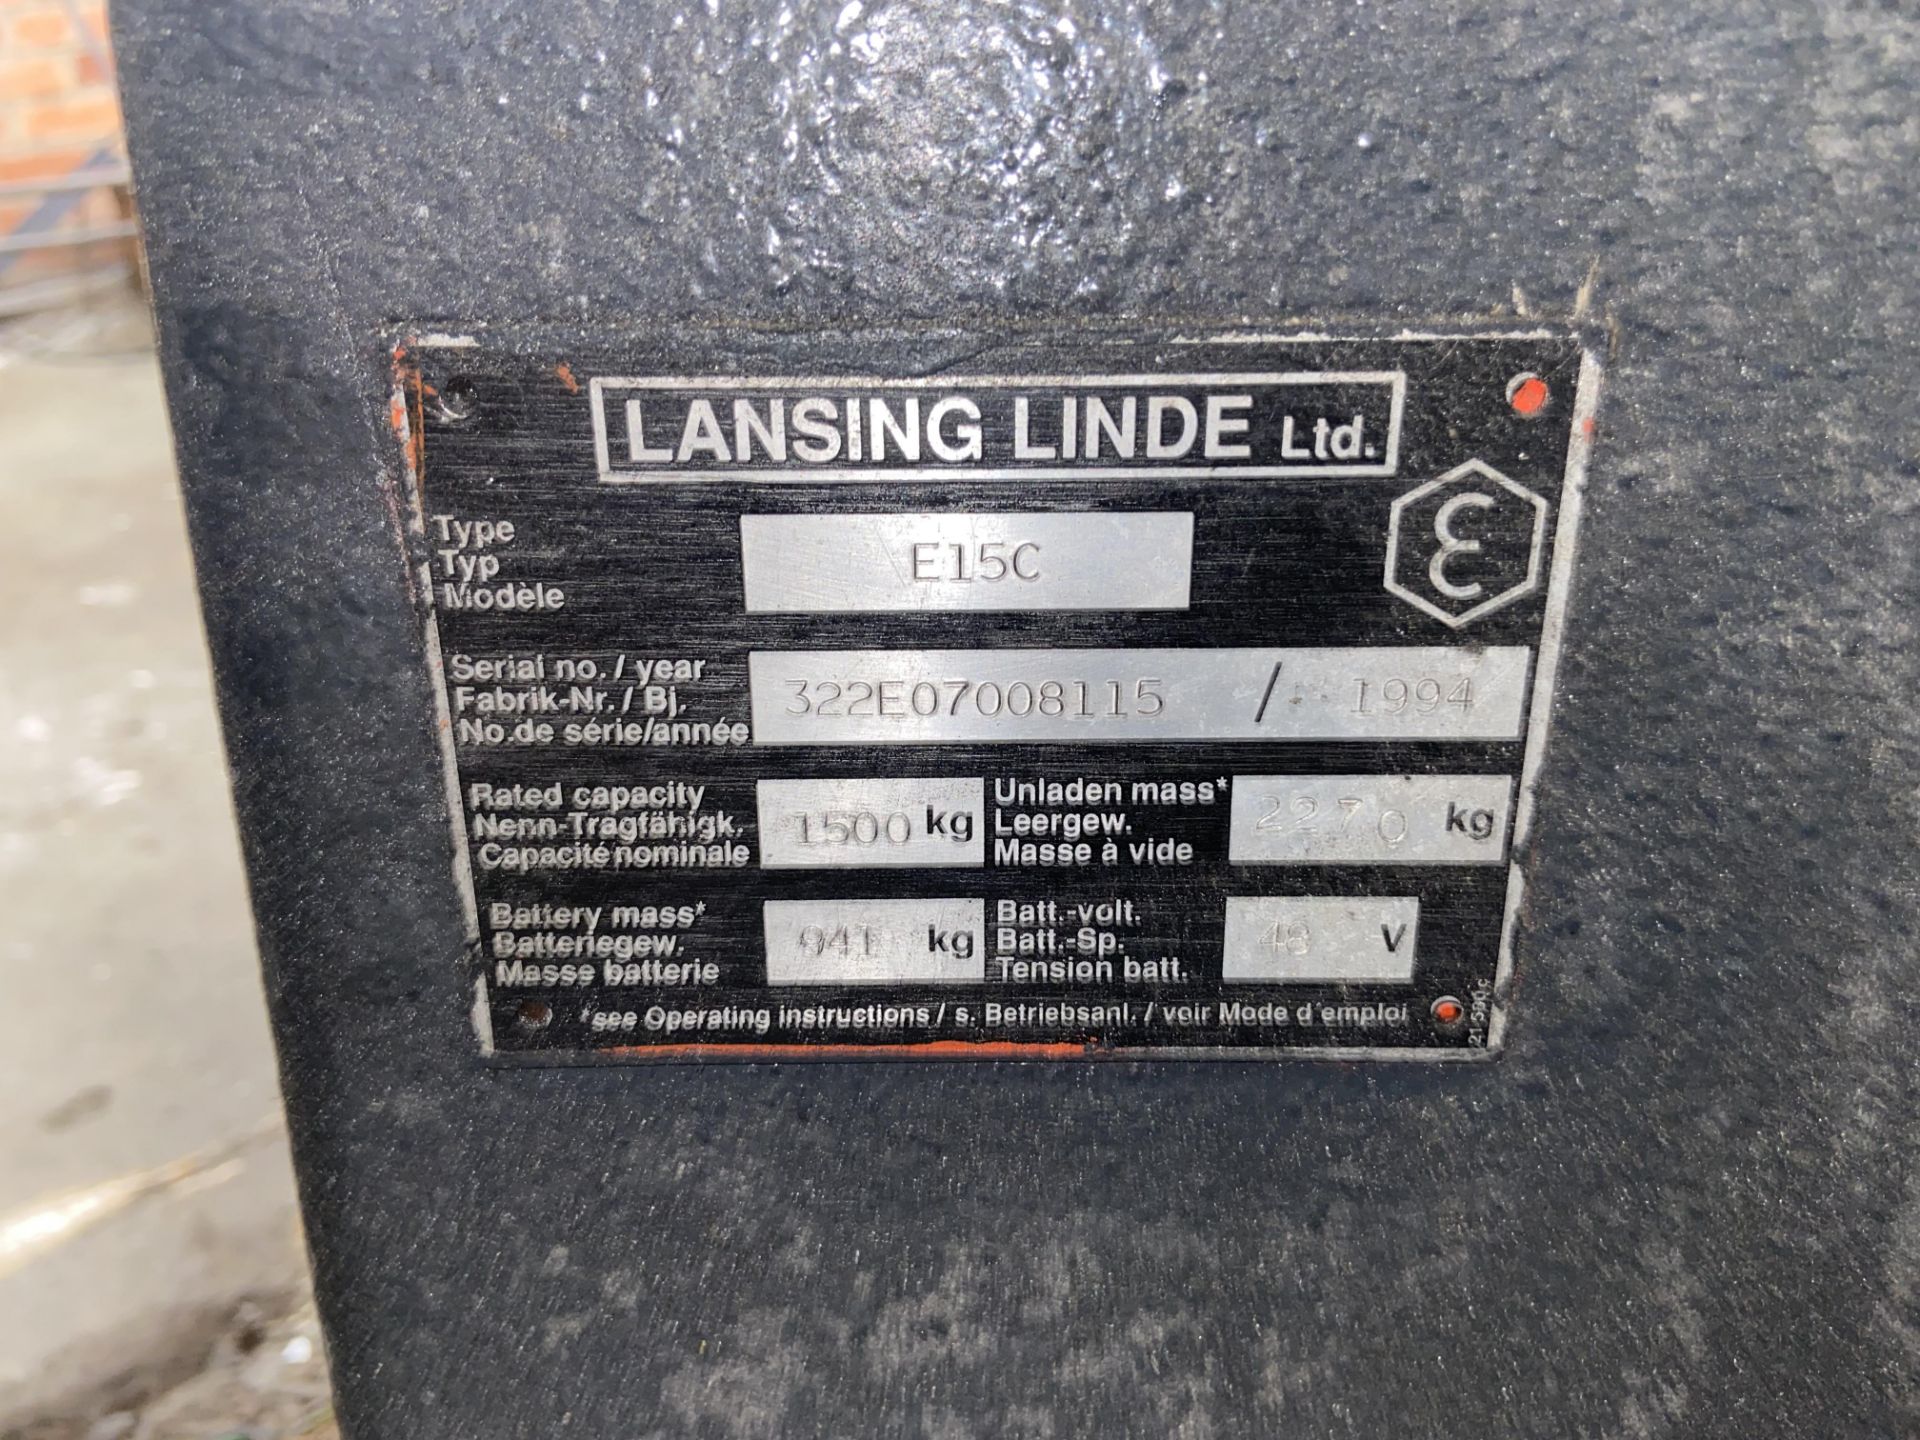 Lansing Linde E15C 1500kg cap. Electric Fork Lift Truck, serial no. 322E07008115, year of - Image 8 of 9